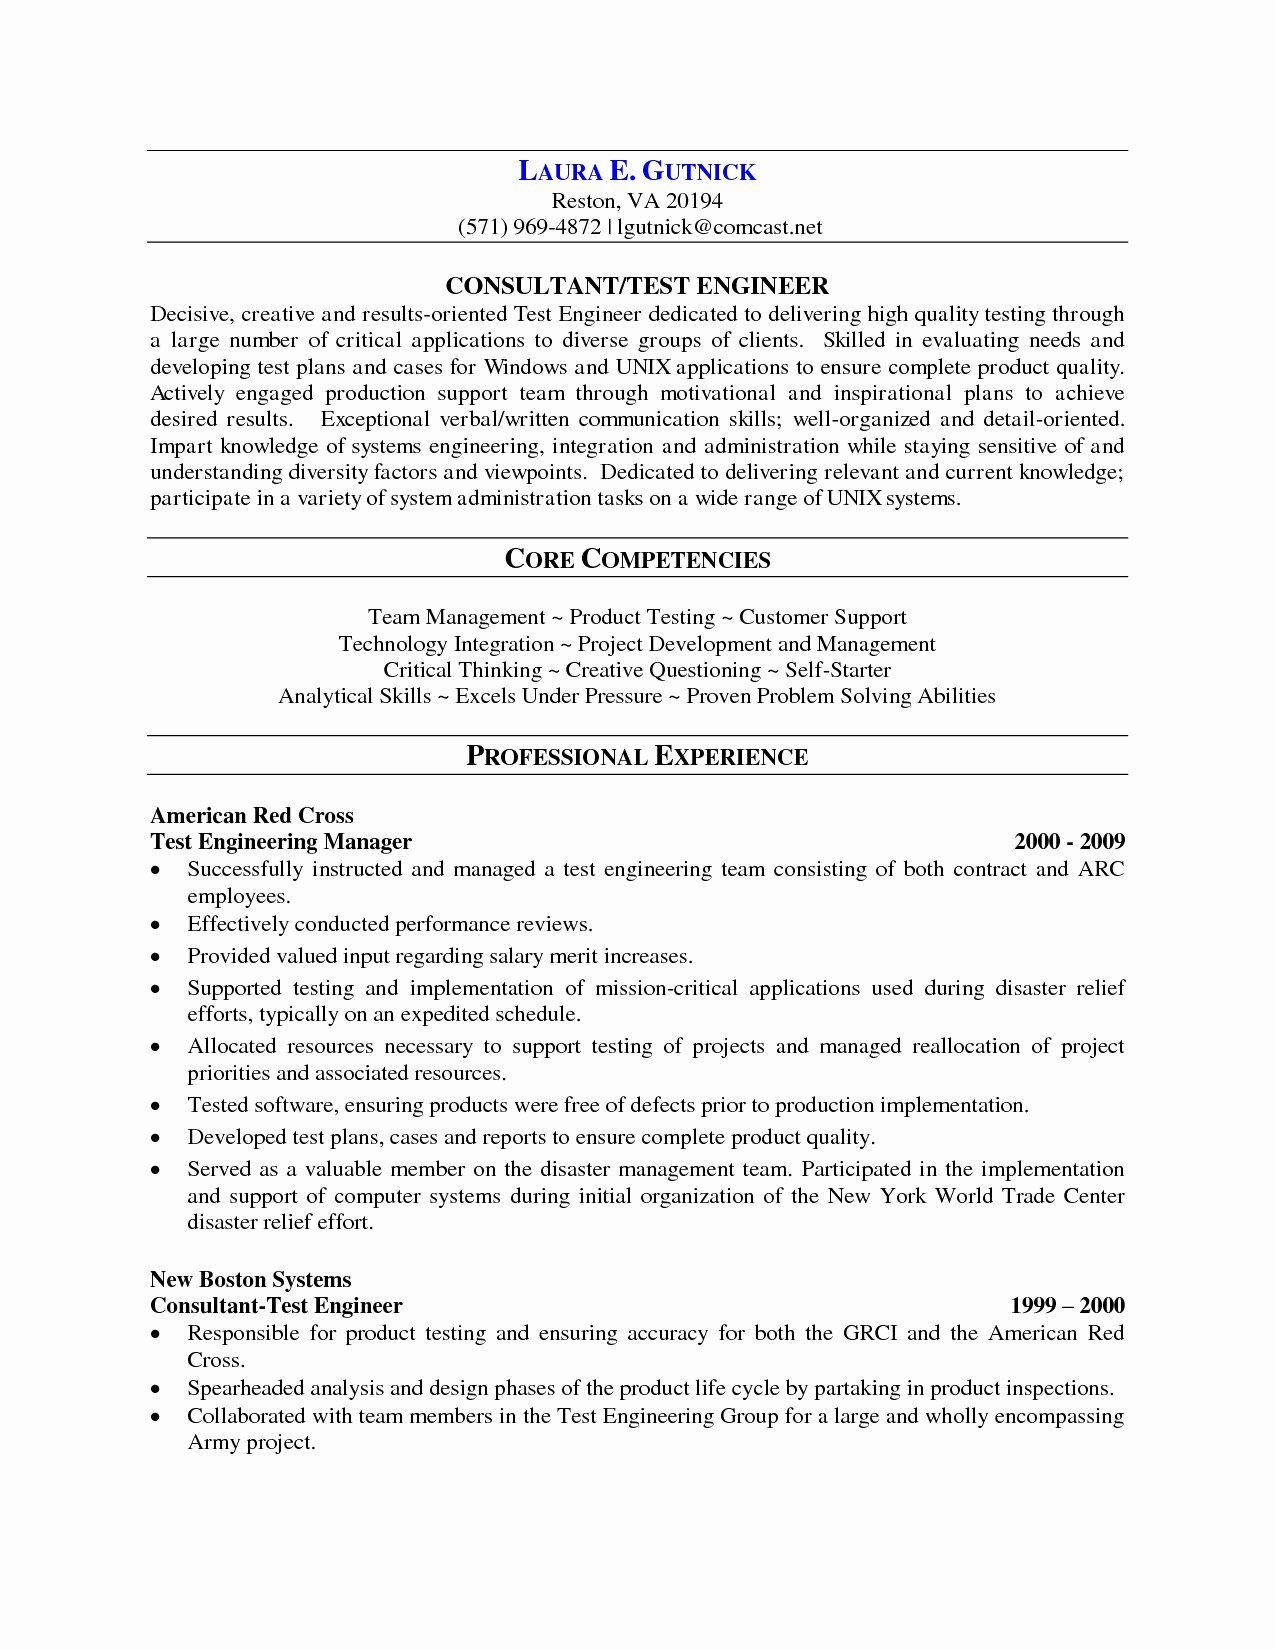 Testing Resume for 1 Year Experience